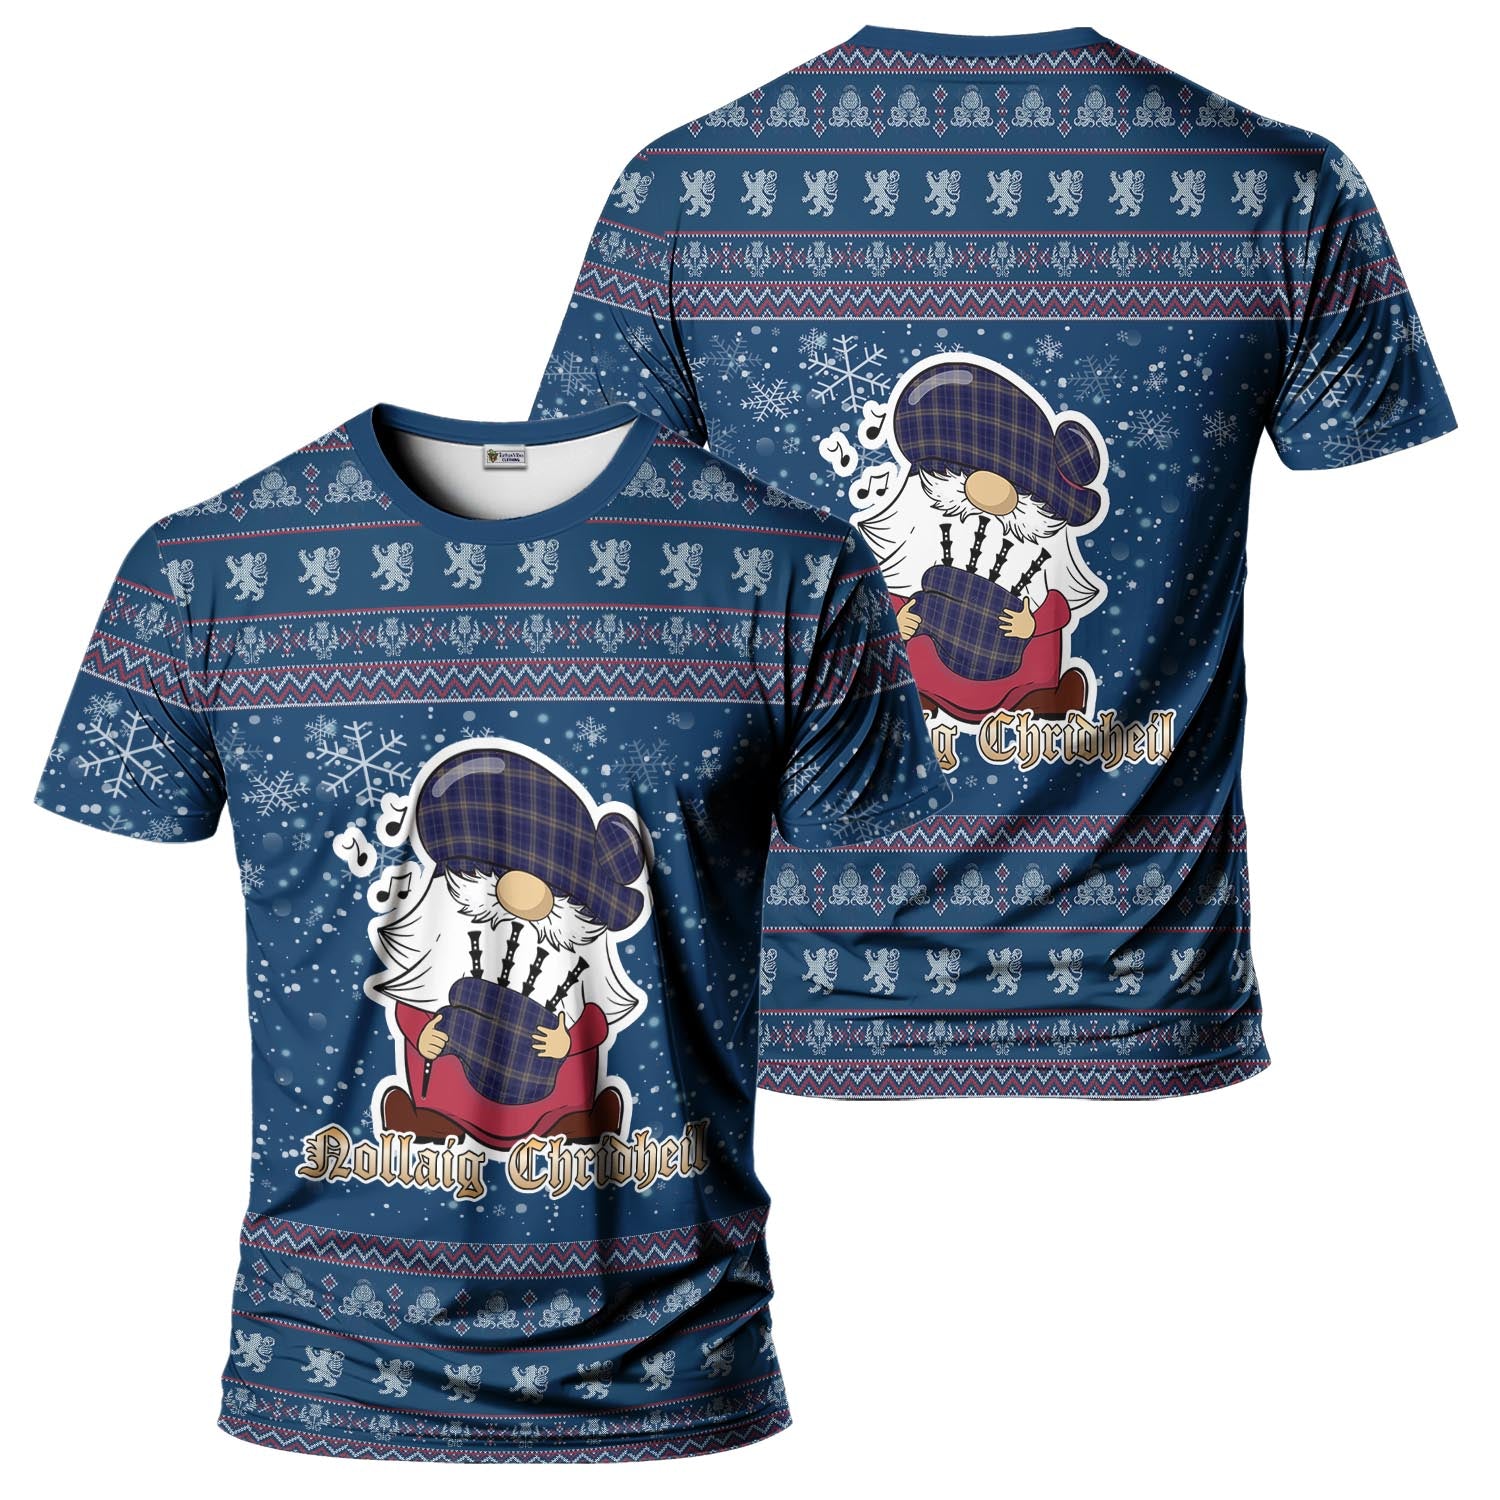 Rhys of Wales Clan Christmas Family T-Shirt with Funny Gnome Playing Bagpipes Kid's Shirt Blue - Tartanvibesclothing